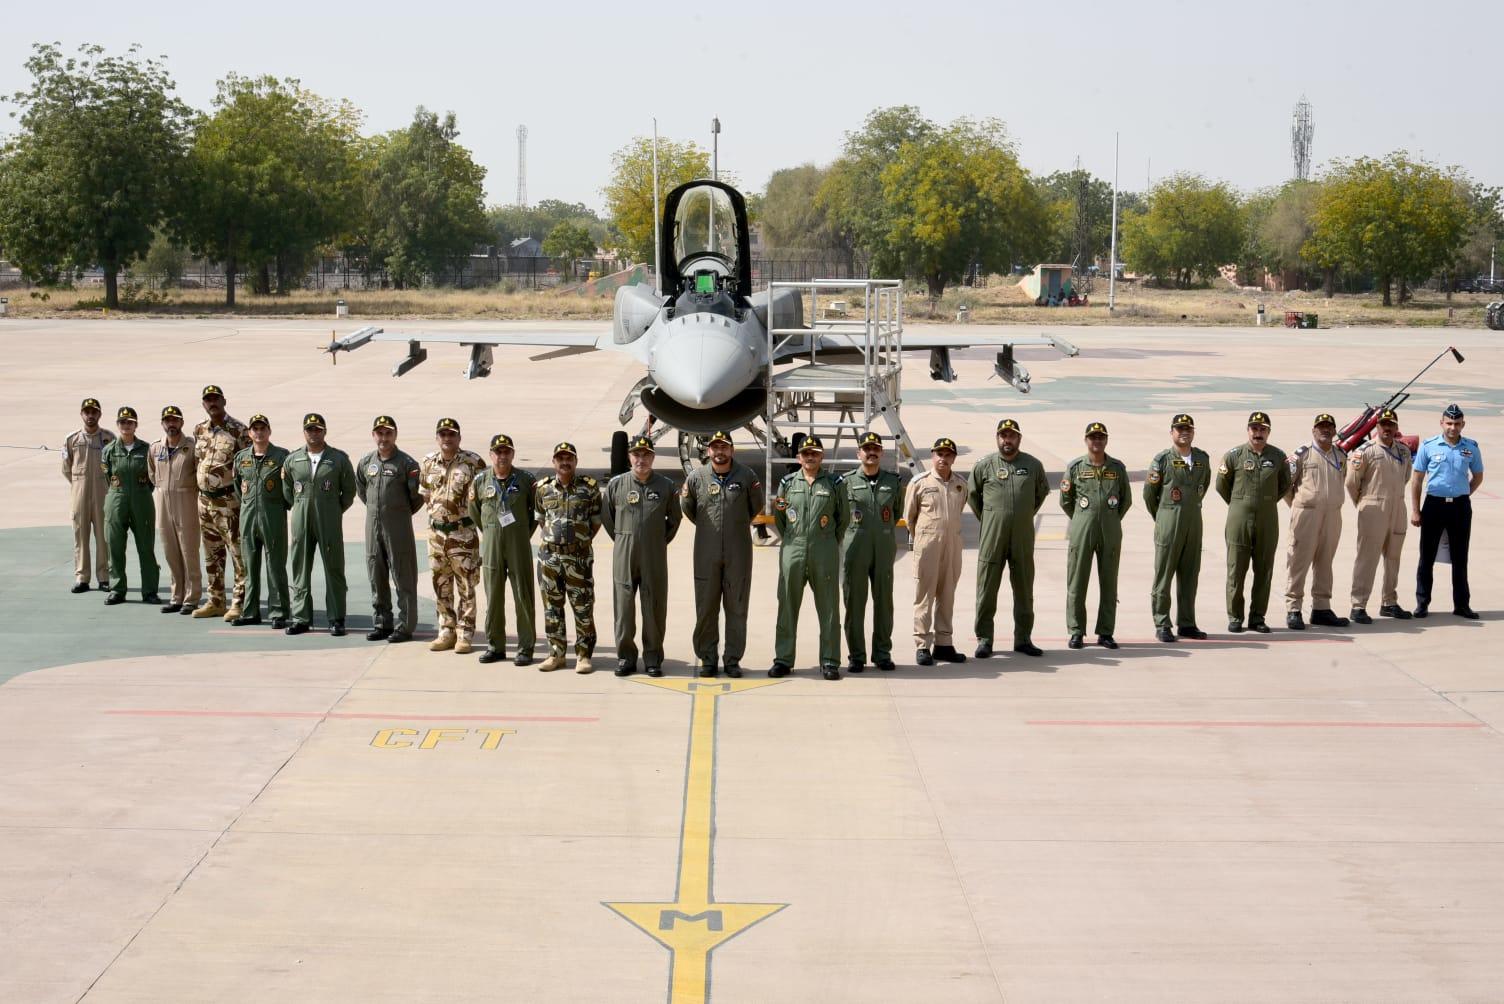  Air forces of India and Oman successfully conclude Eastern Bridge exercise in Jodhpur